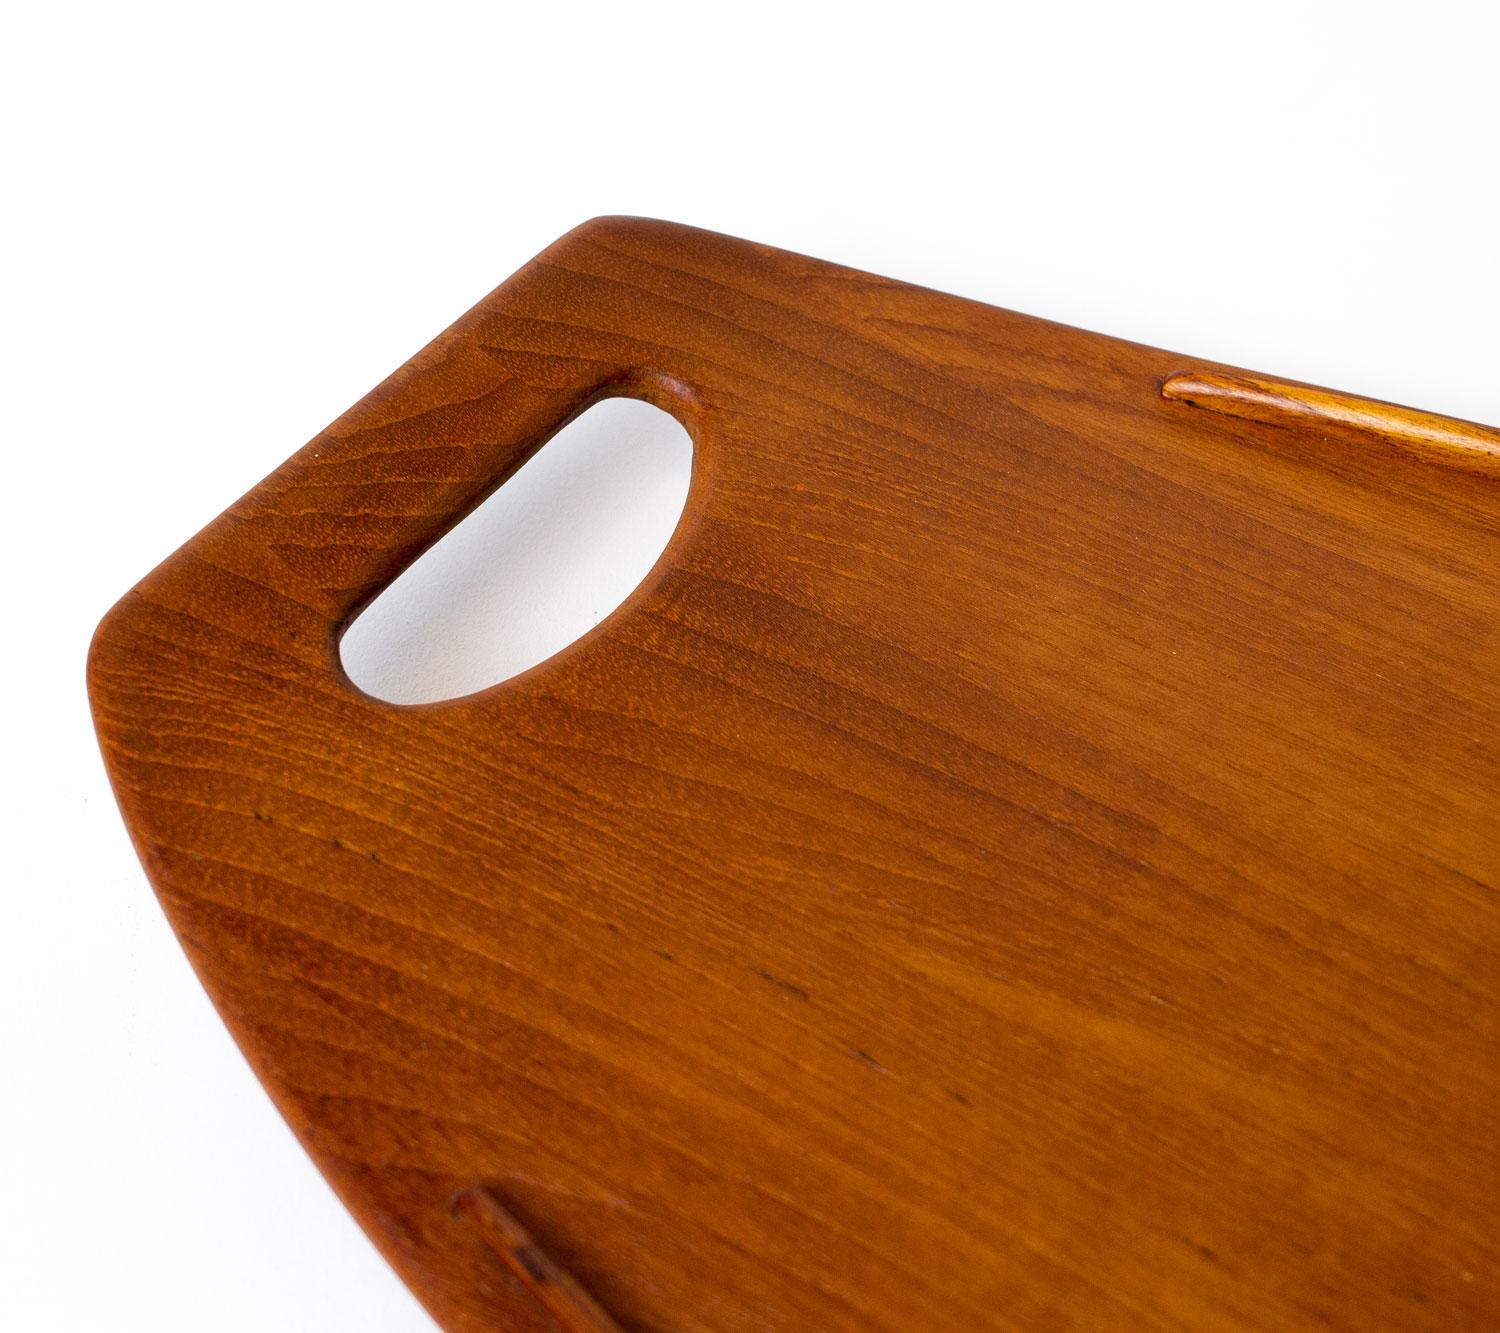 Danish teak tray by Jens Quistgaard, the renowned Danish sculptor and industrial designer who worked prolifically for the American company Dansk Designs in the 1950s and 1960s. His work is in the collections of many museums today including the V&A